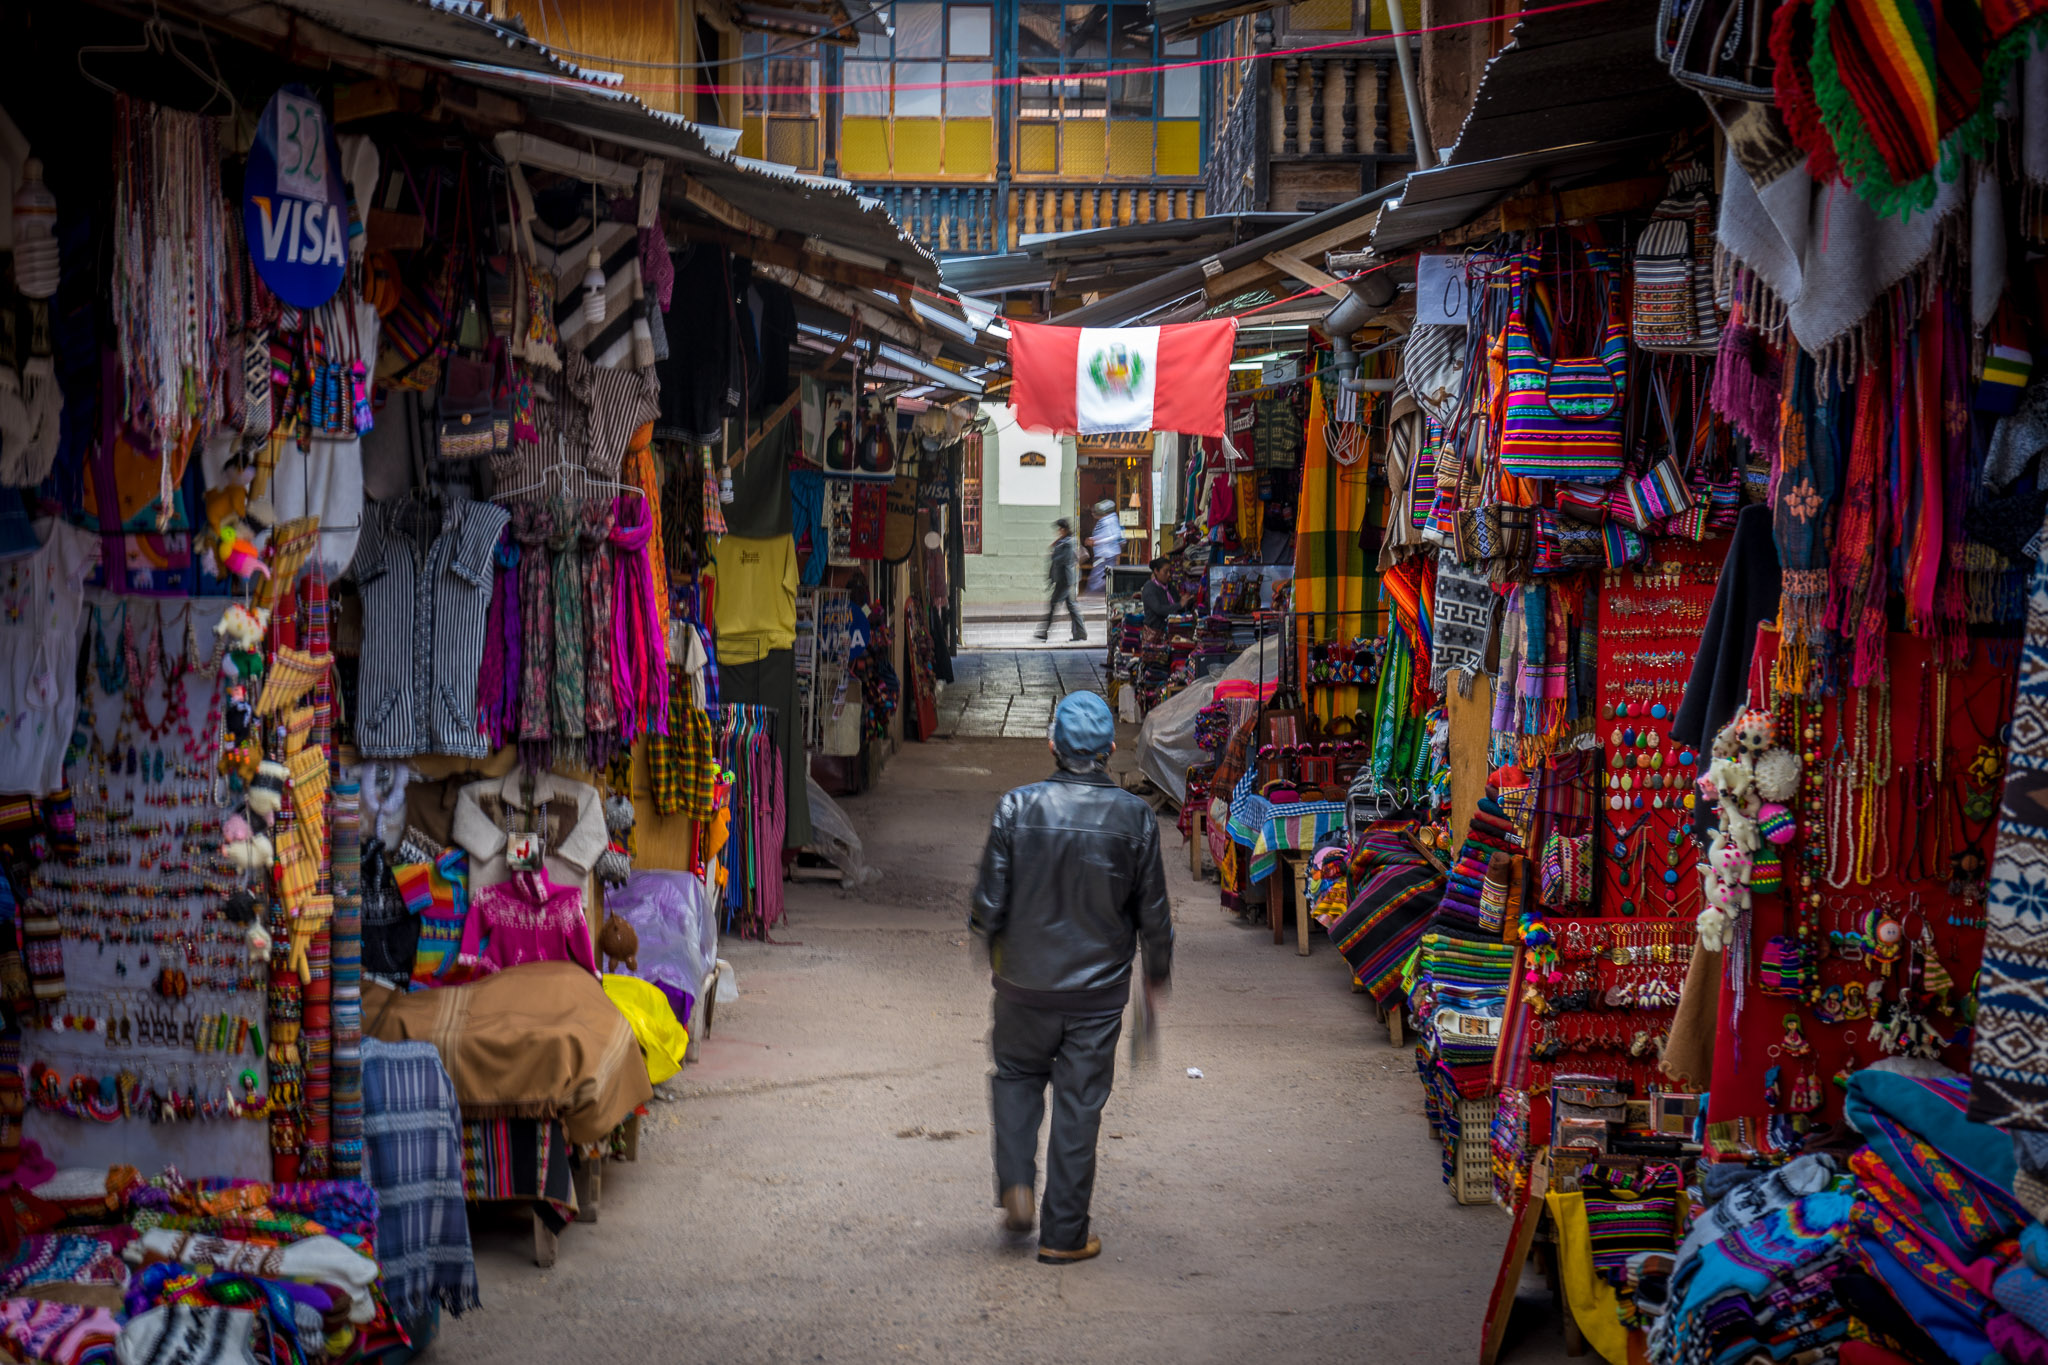 a man walking in a street with many colorful cloths